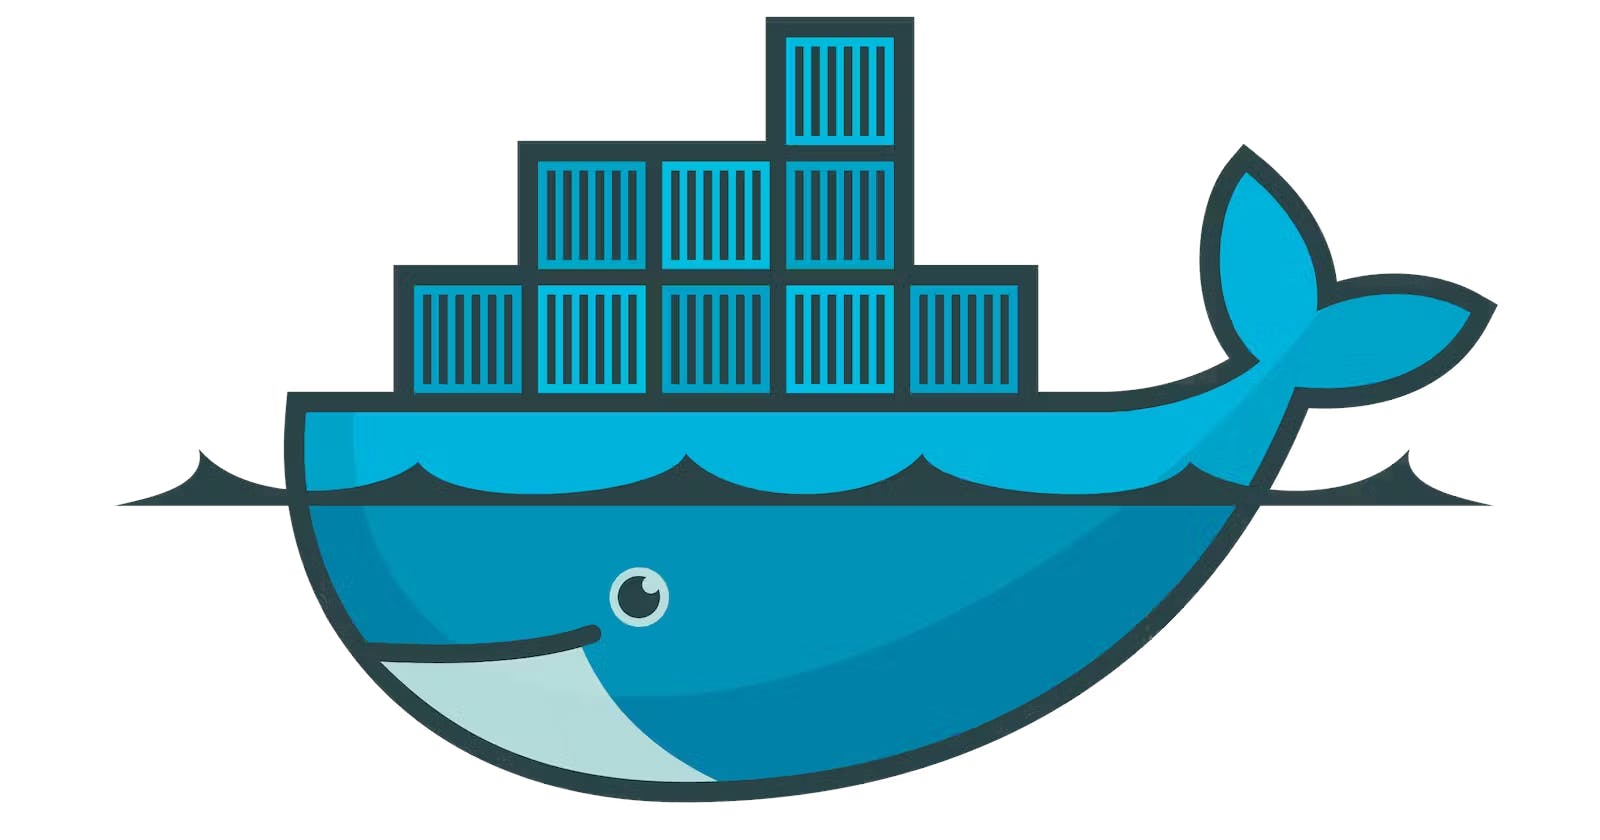 Everything you need to know about Docker as a Beginner